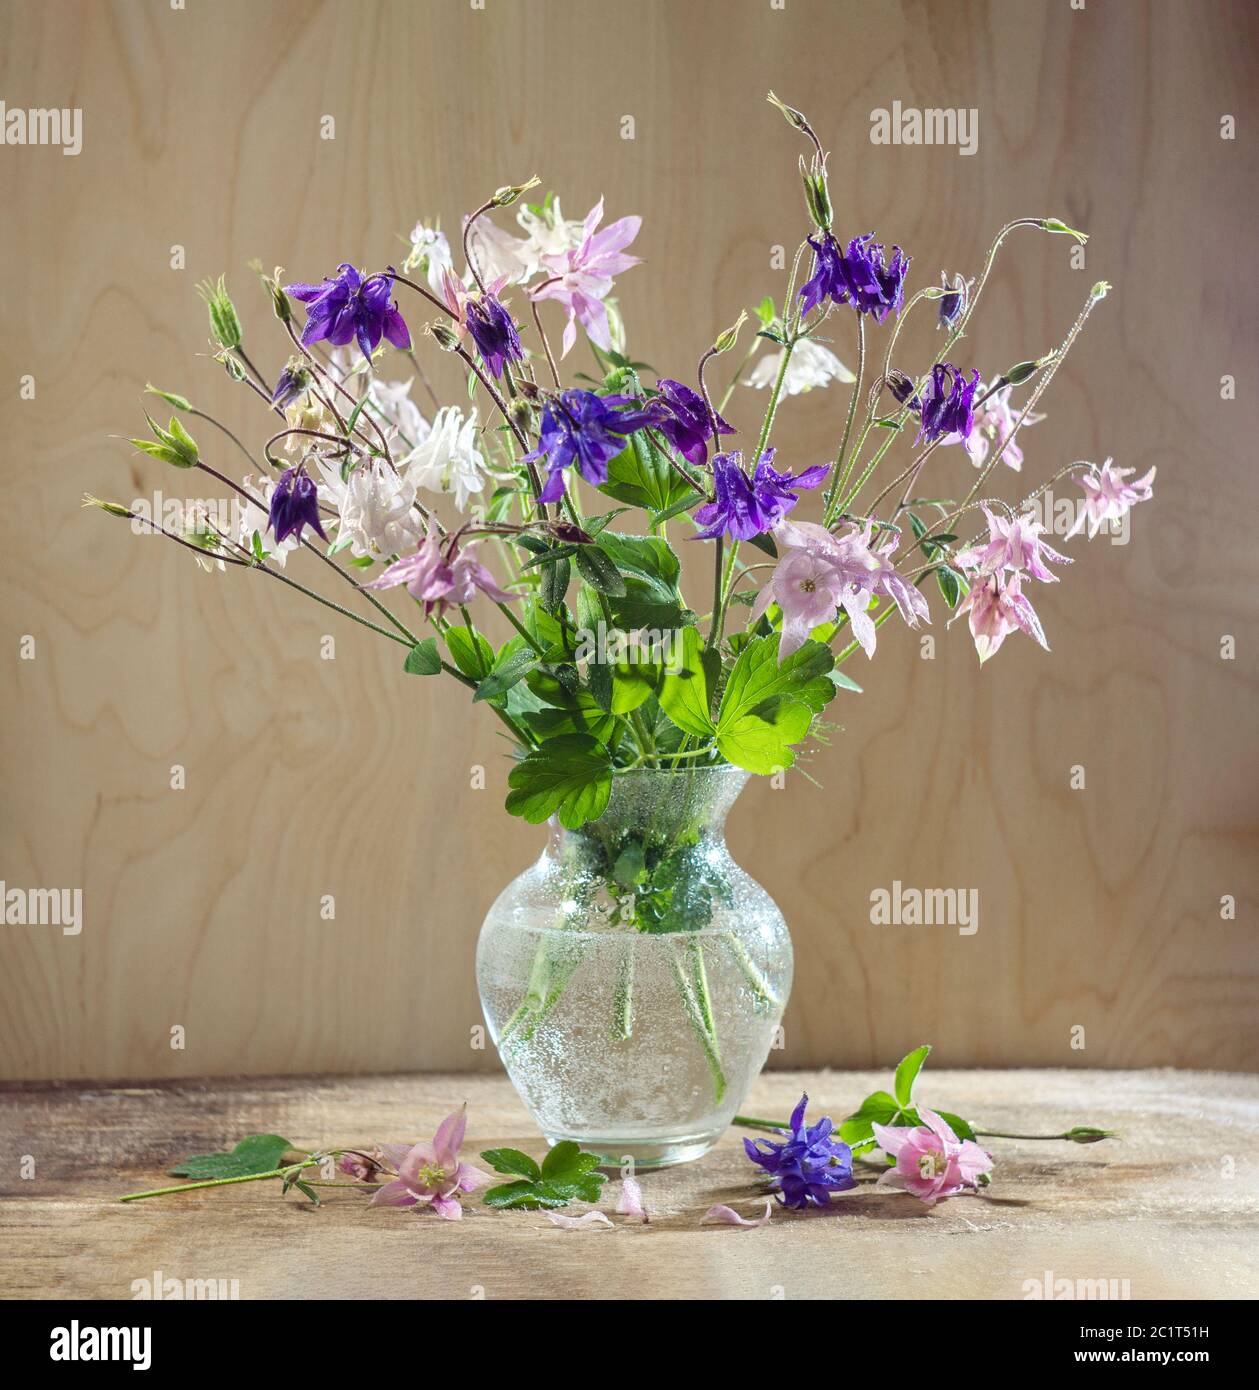 Rustic still life in a glass vase beautiful flowers pink white blue Aquilegia wooden background. Aquilégia vulgáris of the Buttercup family Stock Photo